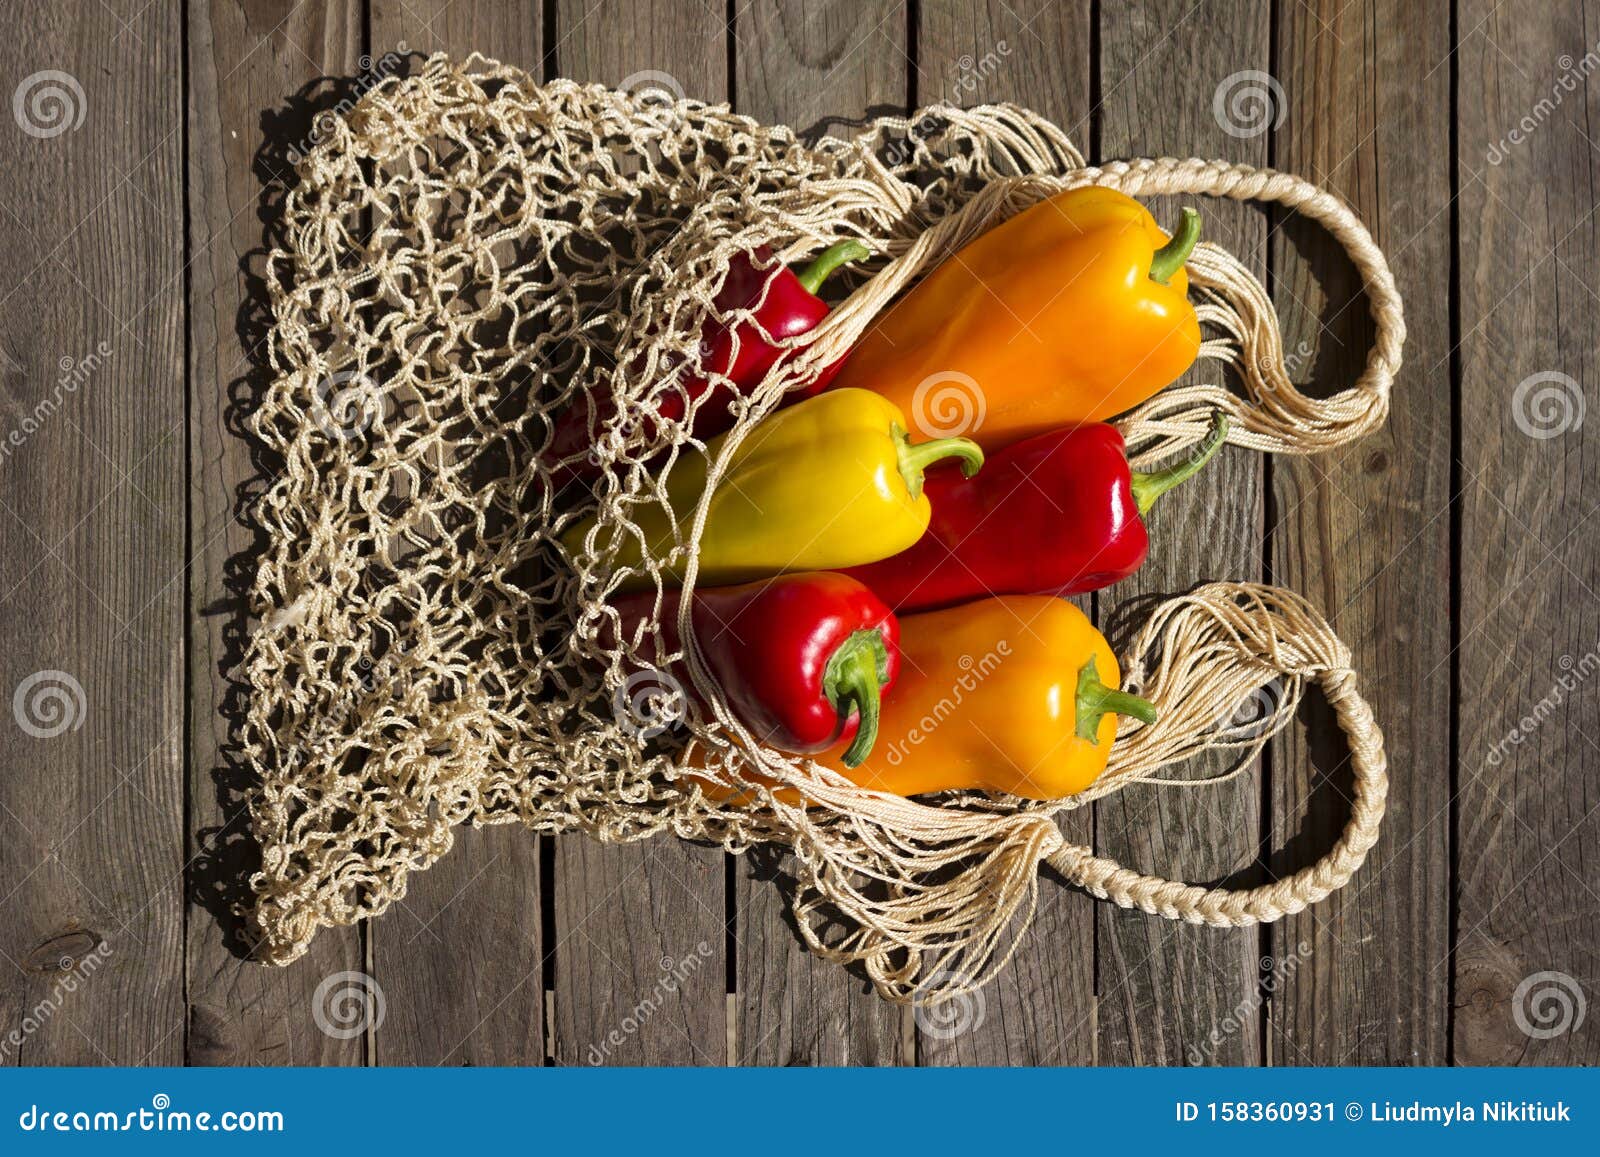 Download 230 Pepper Yellow Red Plastic Bag Photos Free Royalty Free Stock Photos From Dreamstime Yellowimages Mockups